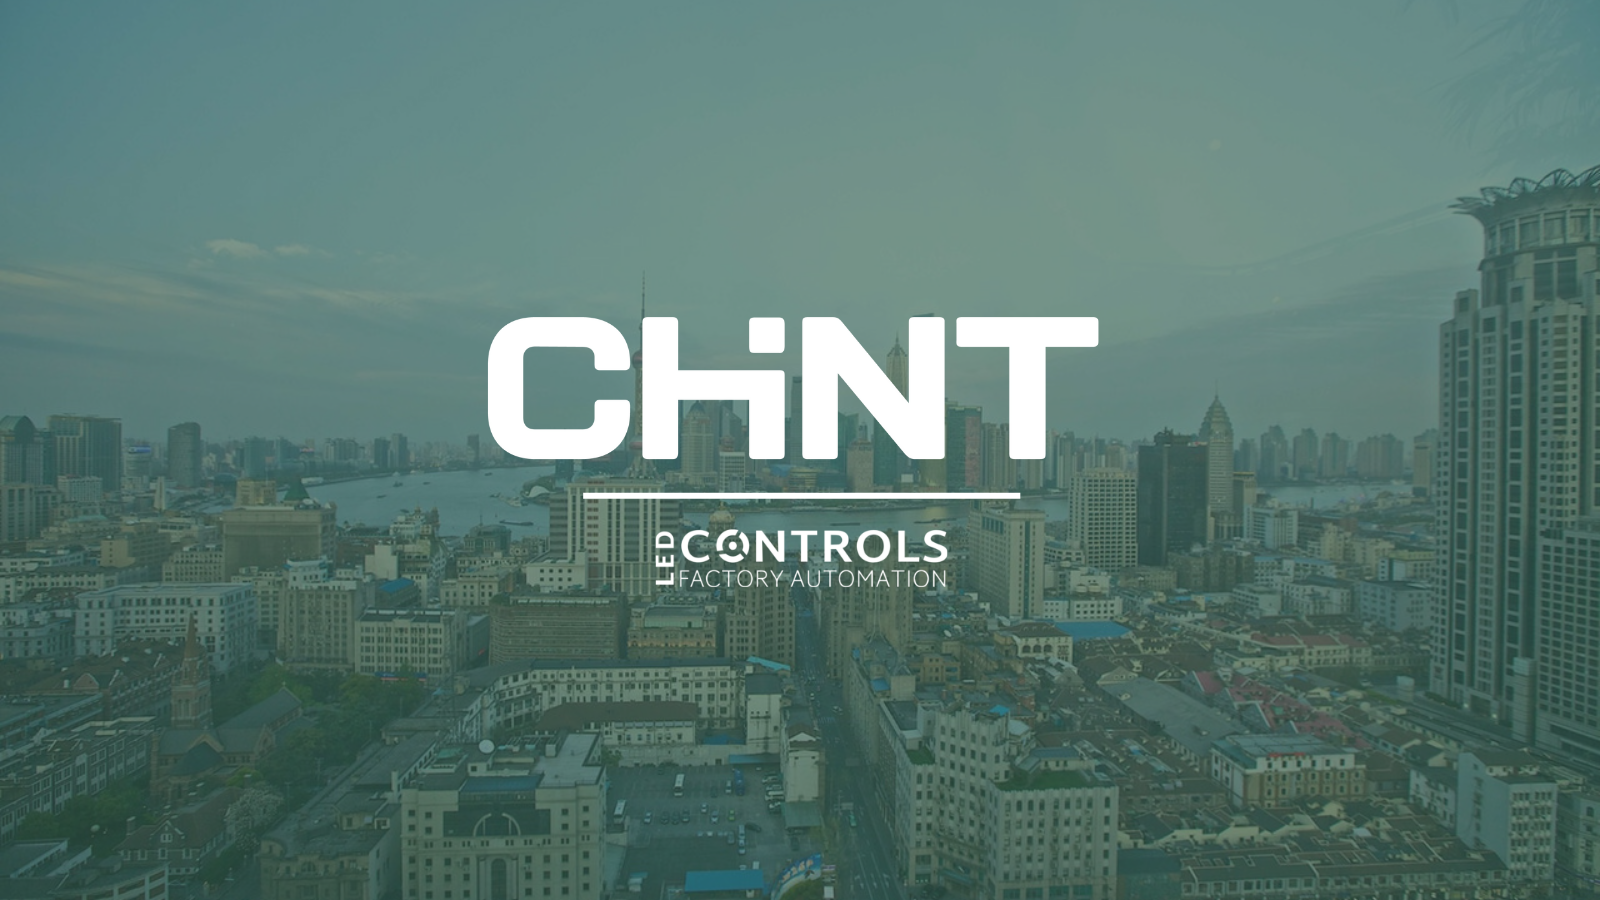 led controls stock chint products